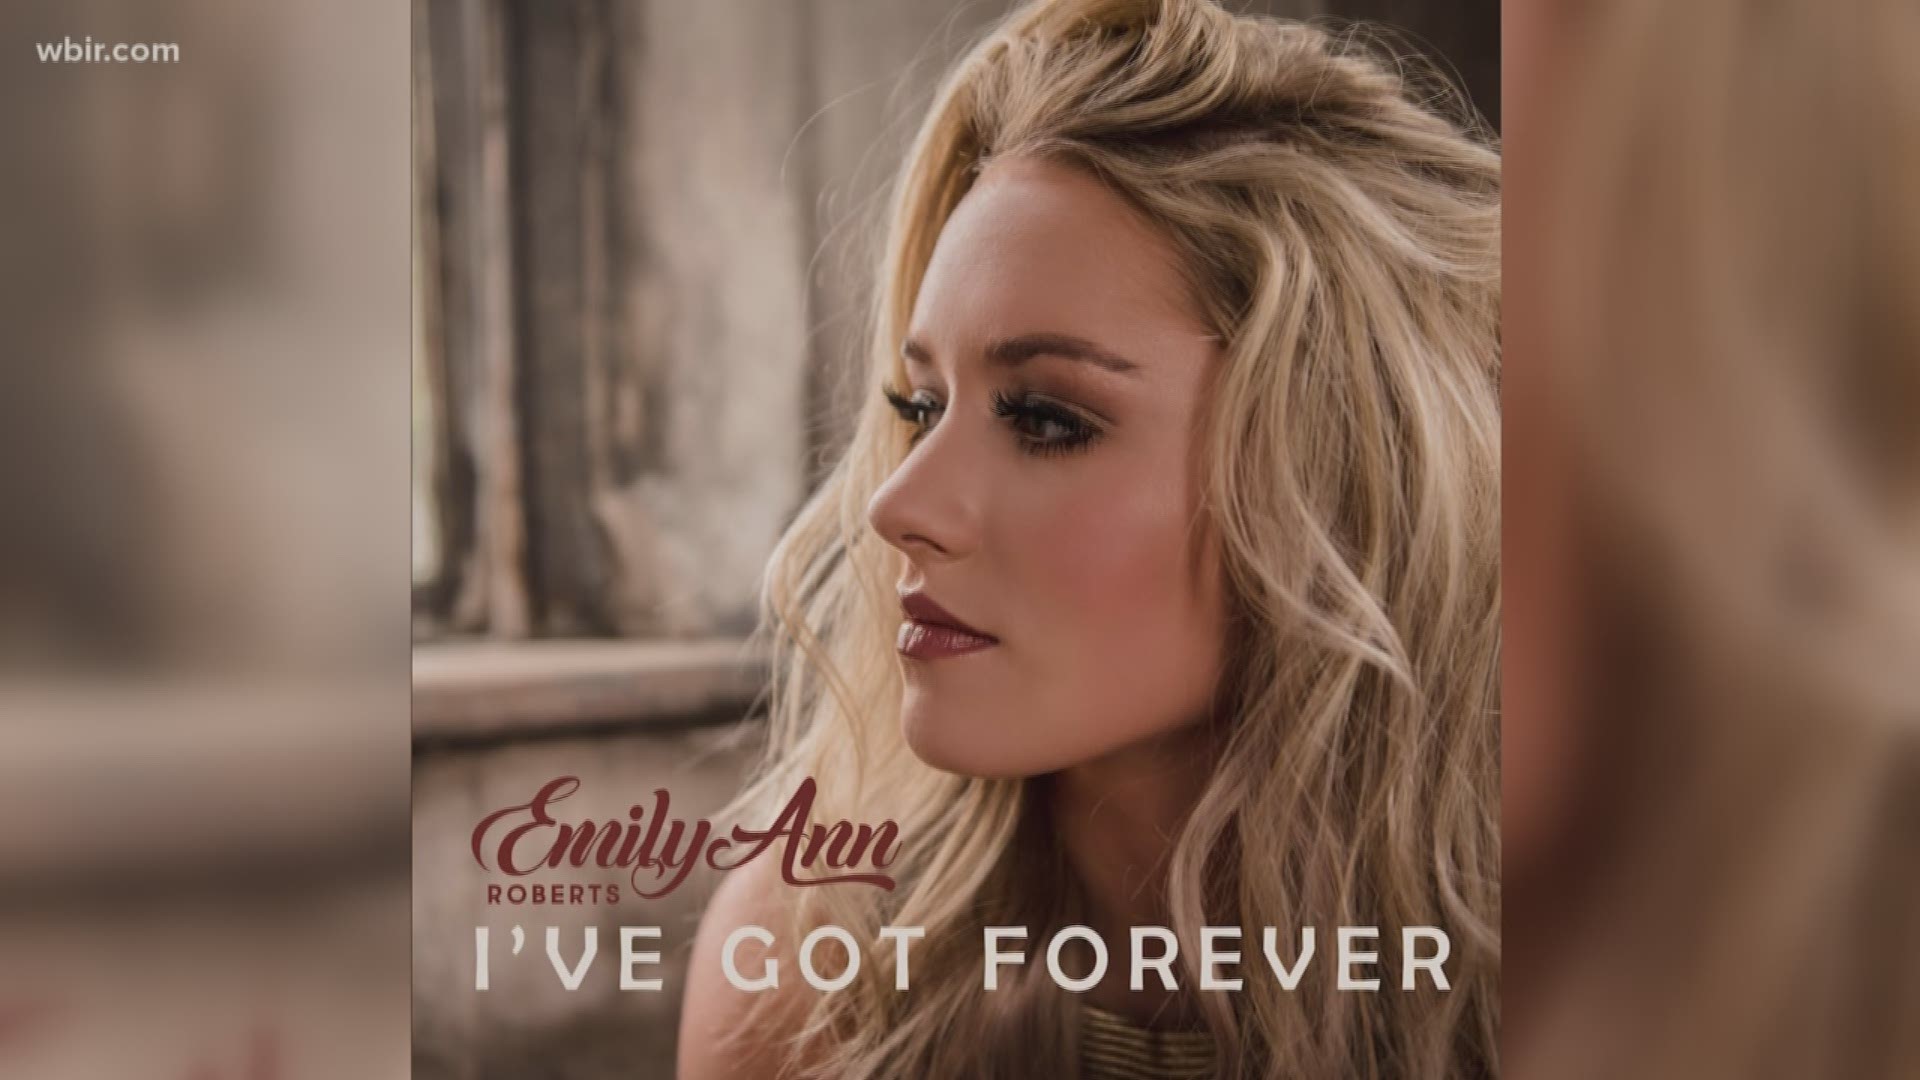 Knoxville's own Emily Ann Roberts has a new single out. The Voice Runner up dropped "I've got Forever" at midnight.